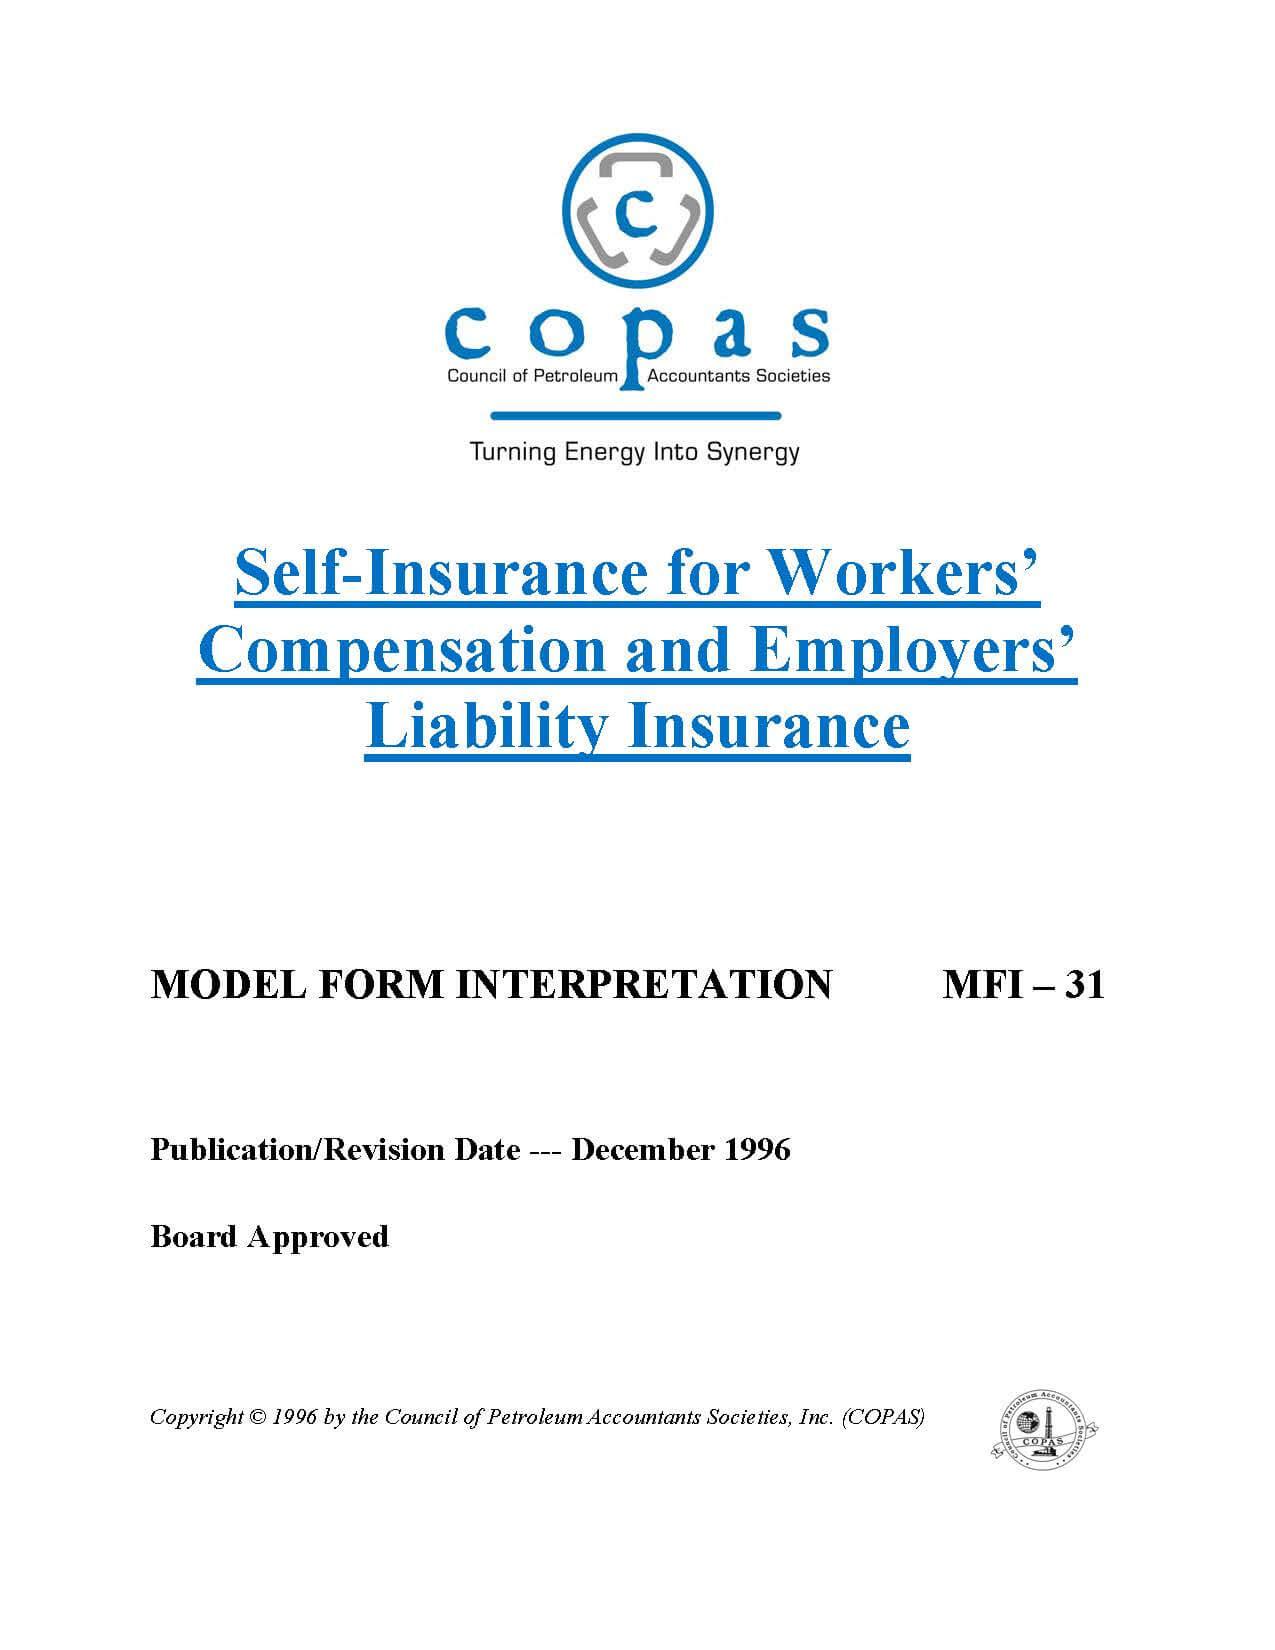 MFI-31 Self-Insurance for Workers’ Compensation and Employers’ Liability Insurance